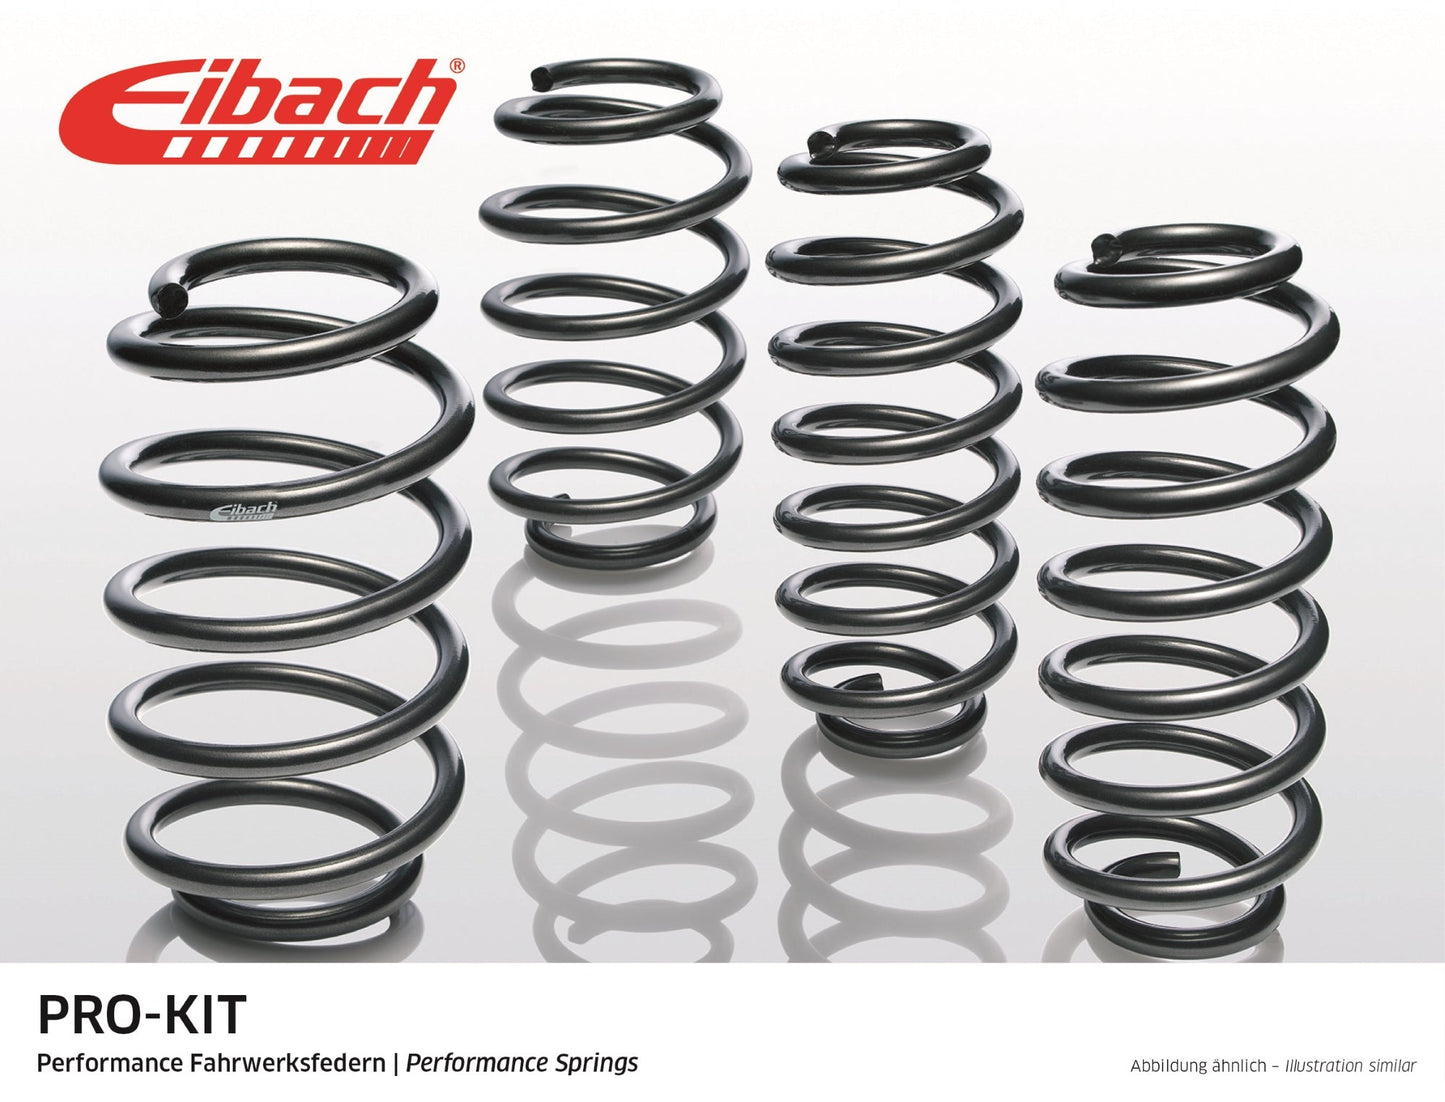 MAZDA 6 STATION WAGON  1.8, 2.0, 2.3 bis Fahrgestell-Nr.: 400 000 30 mm Lowering Springs